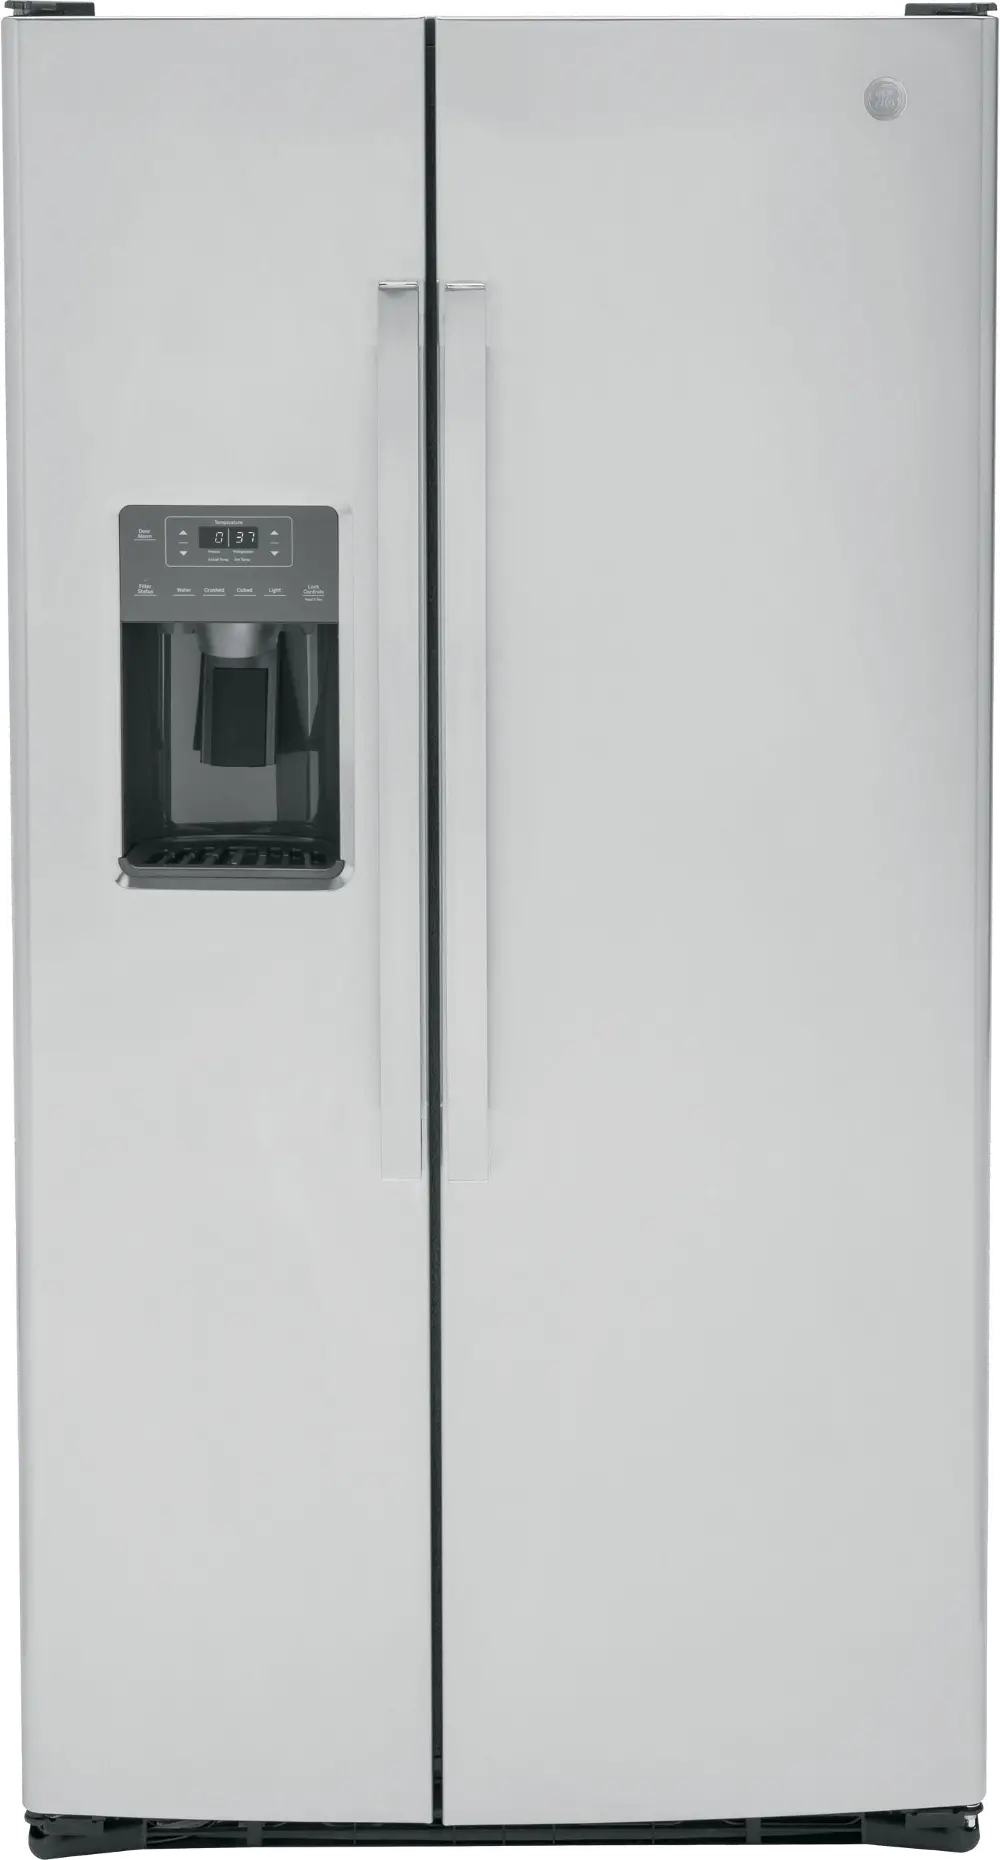 GSS25GYPFS GE 25.1 cu ft Side by Side Refrigerator - Stainless Steel-1